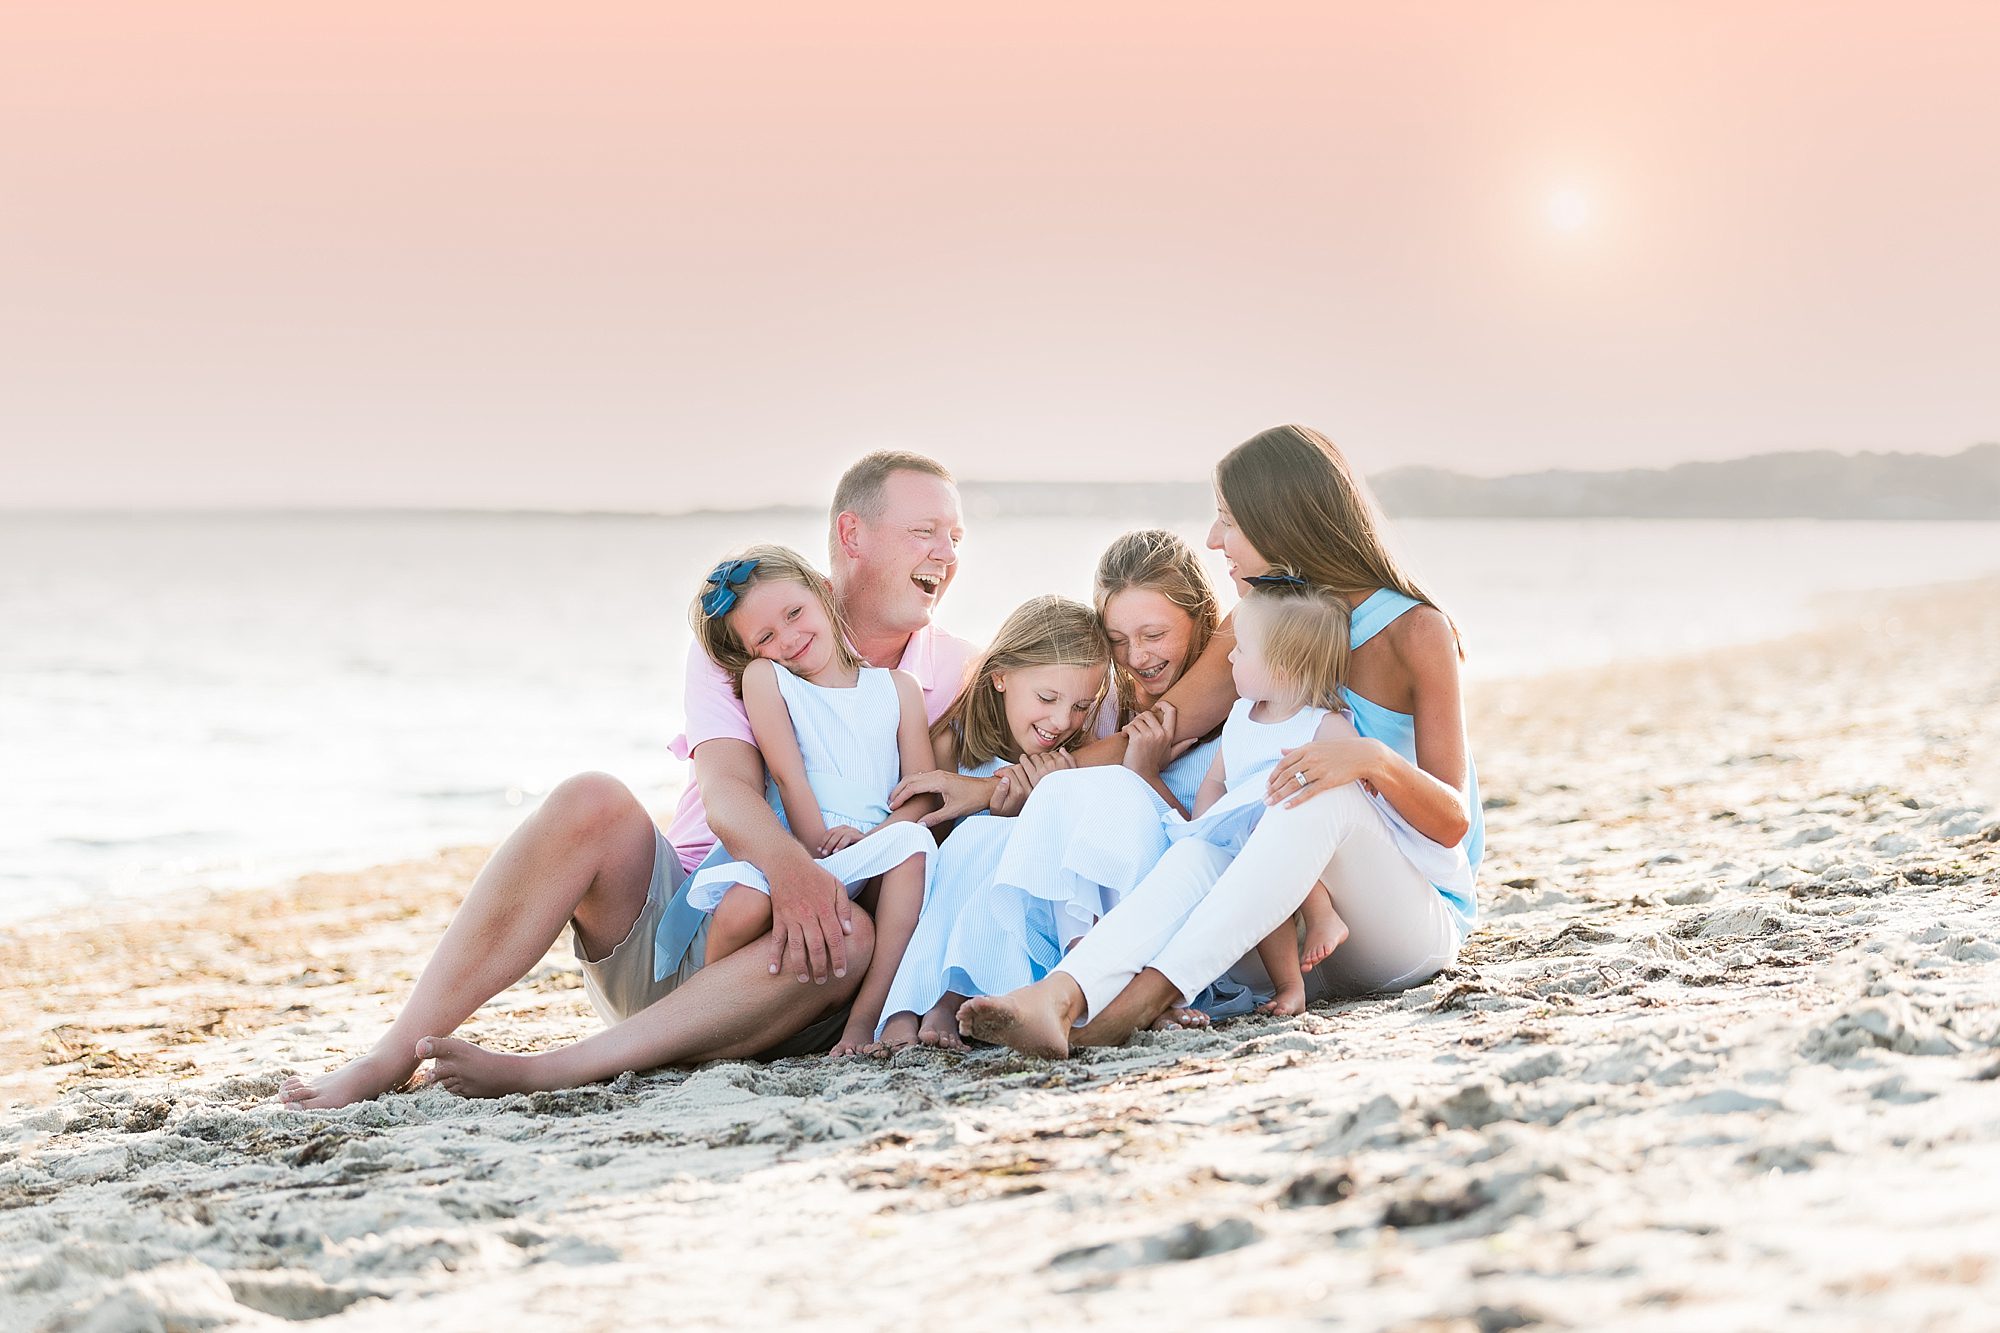 Family of 6 laughing and hugging at the beach